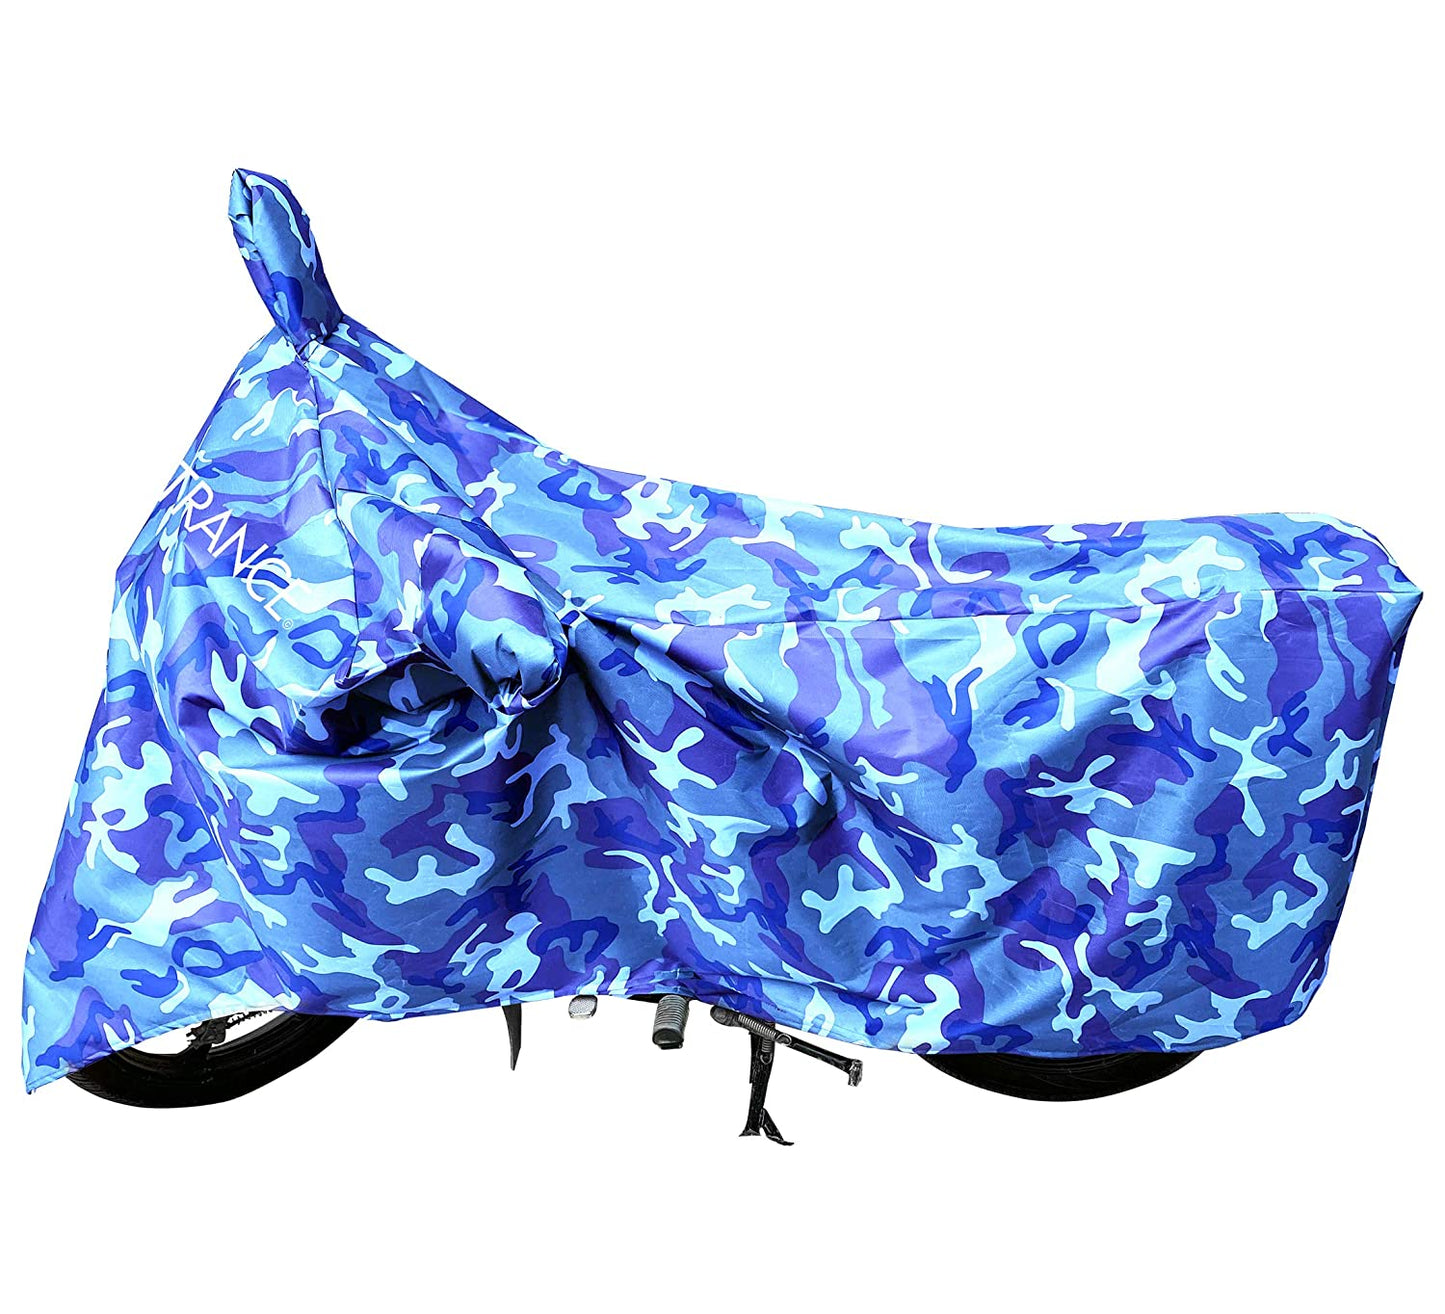 MotoTrance Jungle Bike Body Covers For Bajaj Eliminator - Interlock-Stitched Waterproof and Heat Resistant with Mirror Pockets